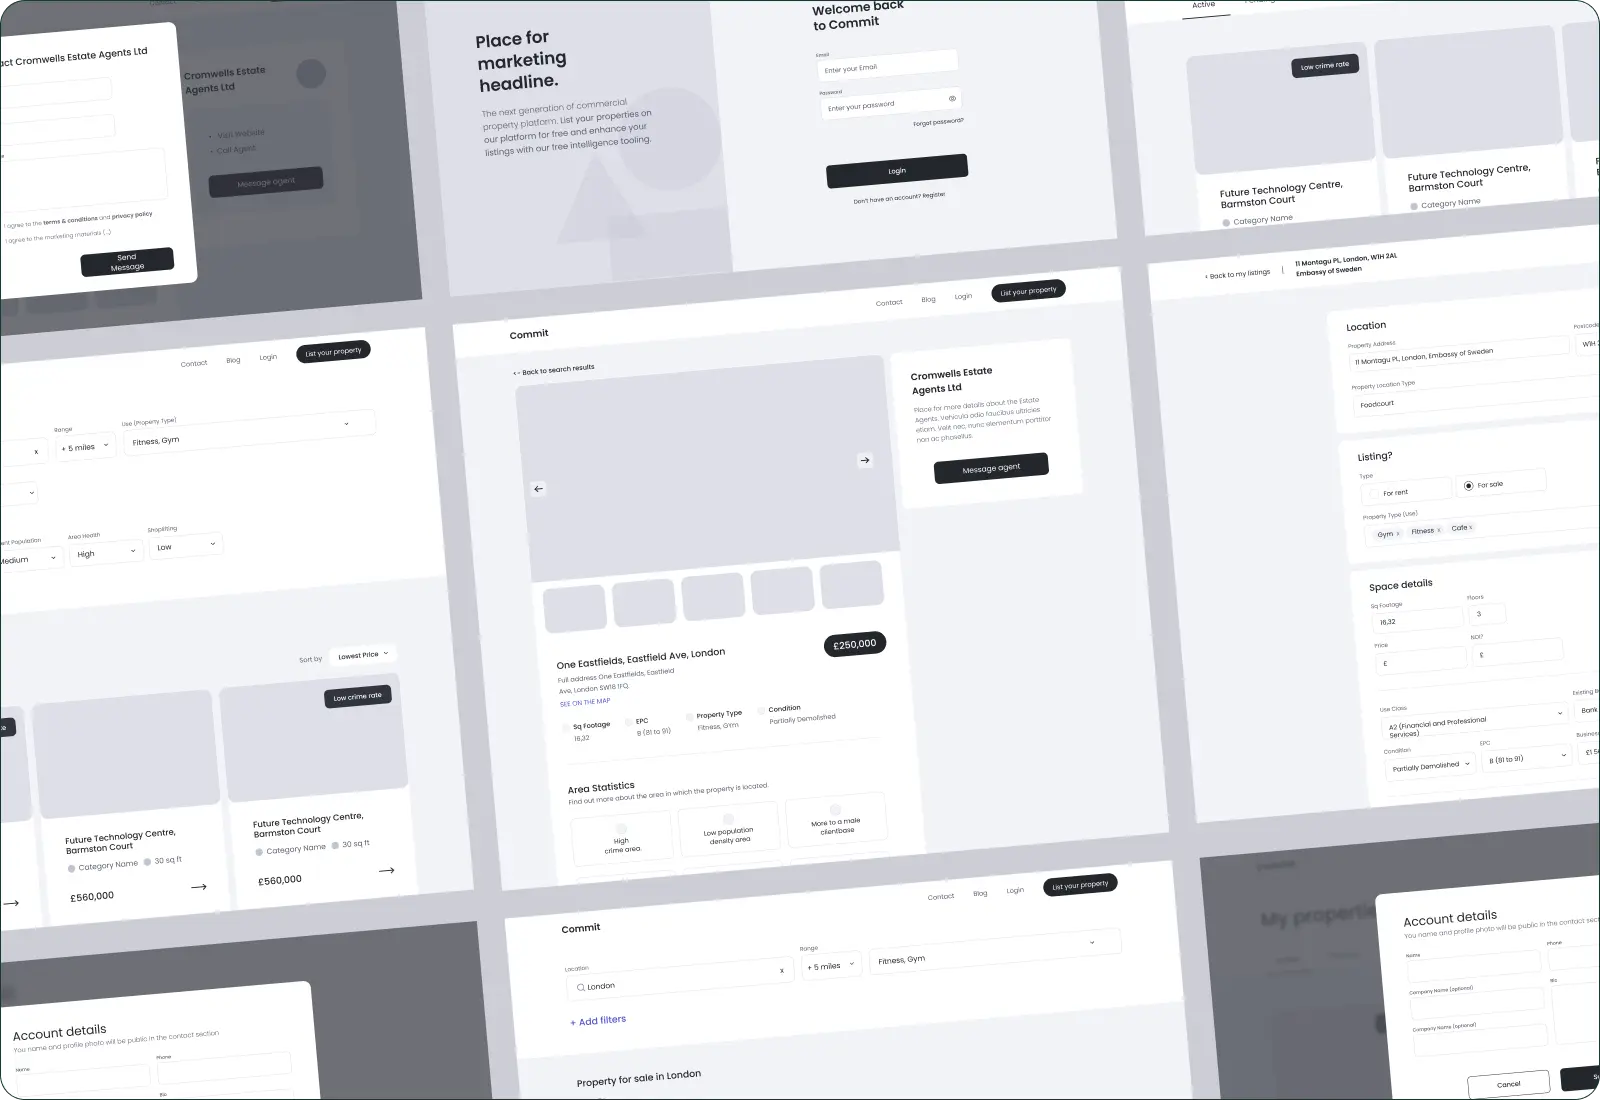 Collage of wireframe screens for a property listing website. The layout includes a marketing headline, login and registration forms, property search with filters, listings for sale, agent contact information, property details, and account management sections. The design is monochrome, focusing on structure and layout without colour, indicating the wireframes are for planning the user interface of the website.